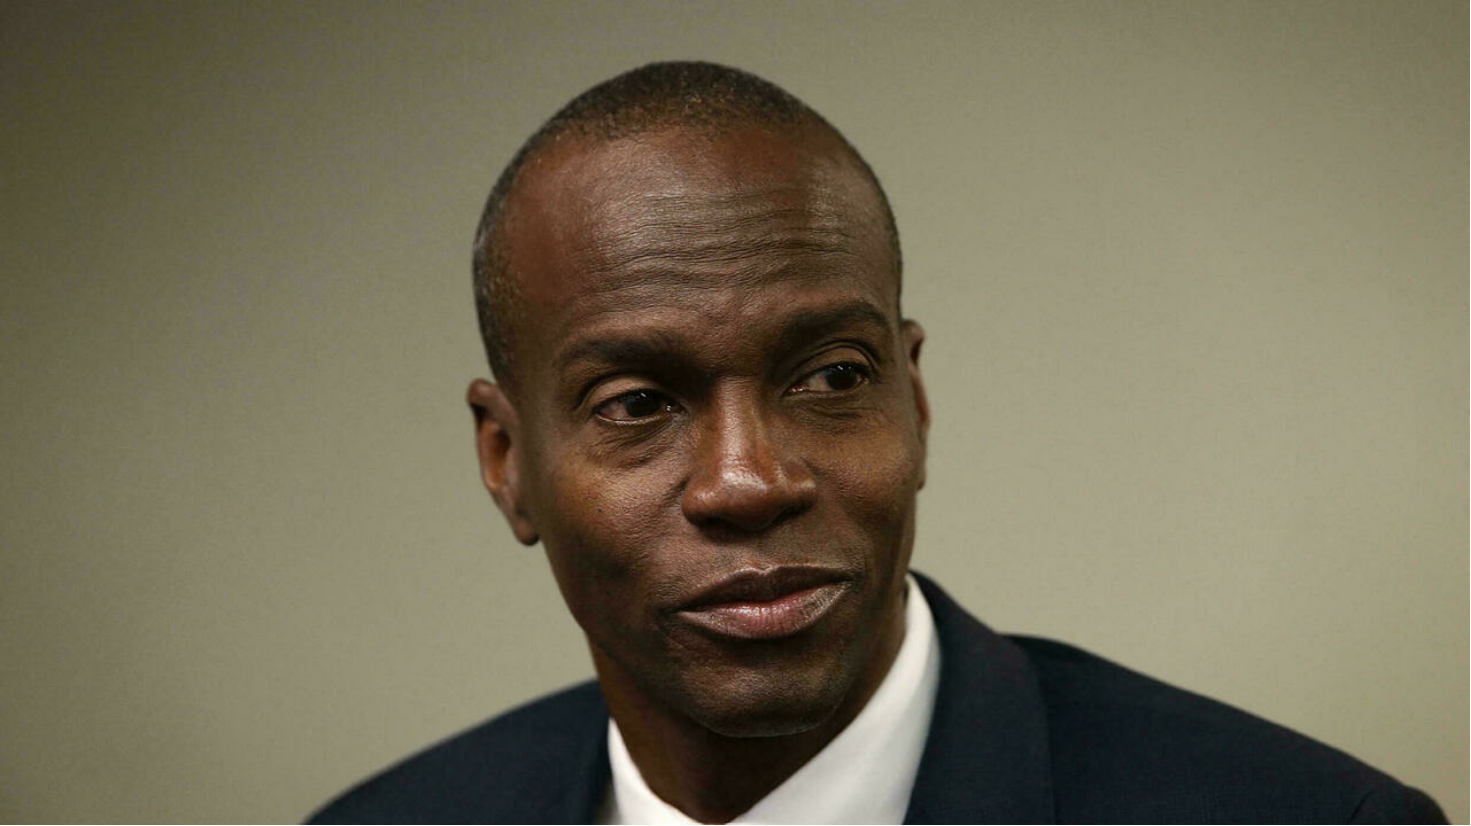 File photo of then Haitian presidential candidate Jovenel Moise taken in April 2016. Moise was assassinated on July 7, 2021, according to the Haiti's interim prime minister. AFP - ALEX WONG